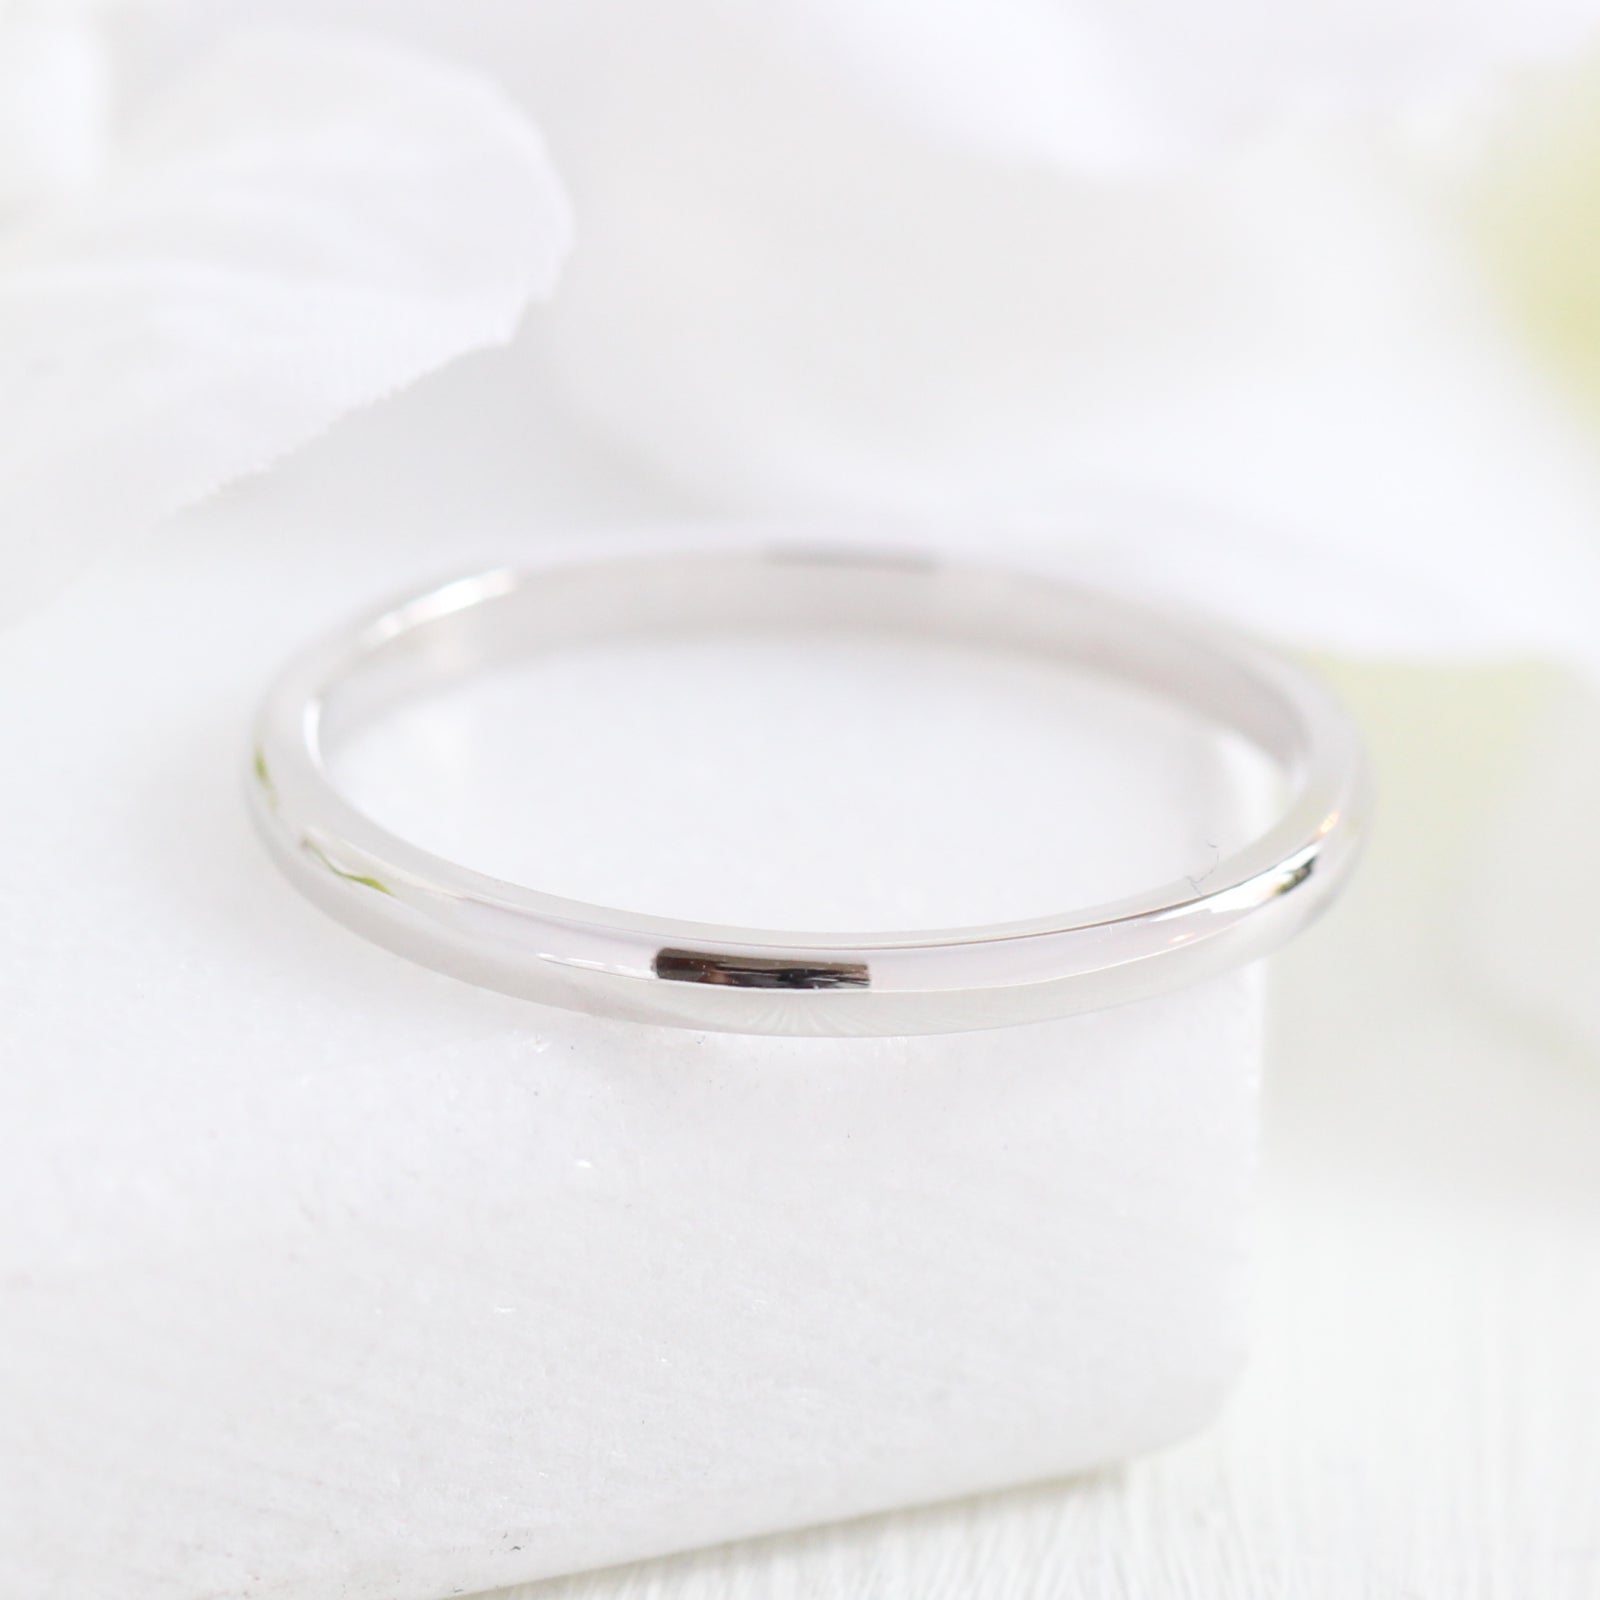 Plain gold wedding band solid 14k white gold ring by la more design jewelry